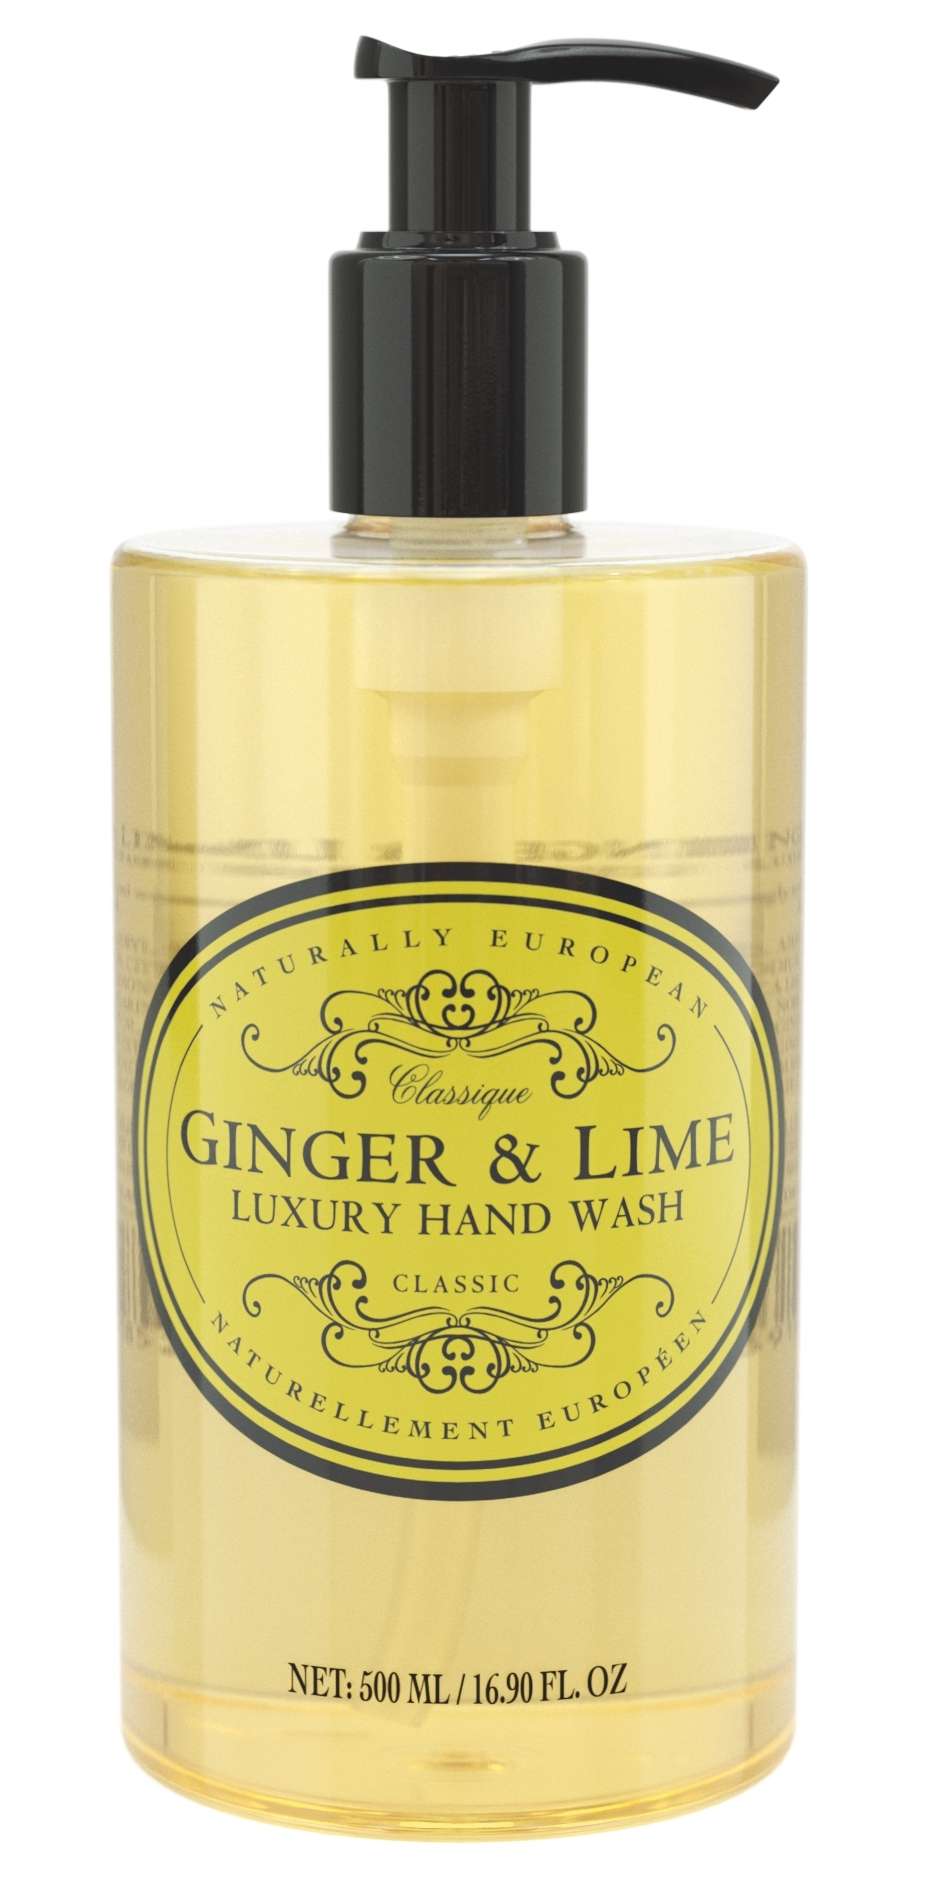 Naturally European Ginger & Lime hand wash